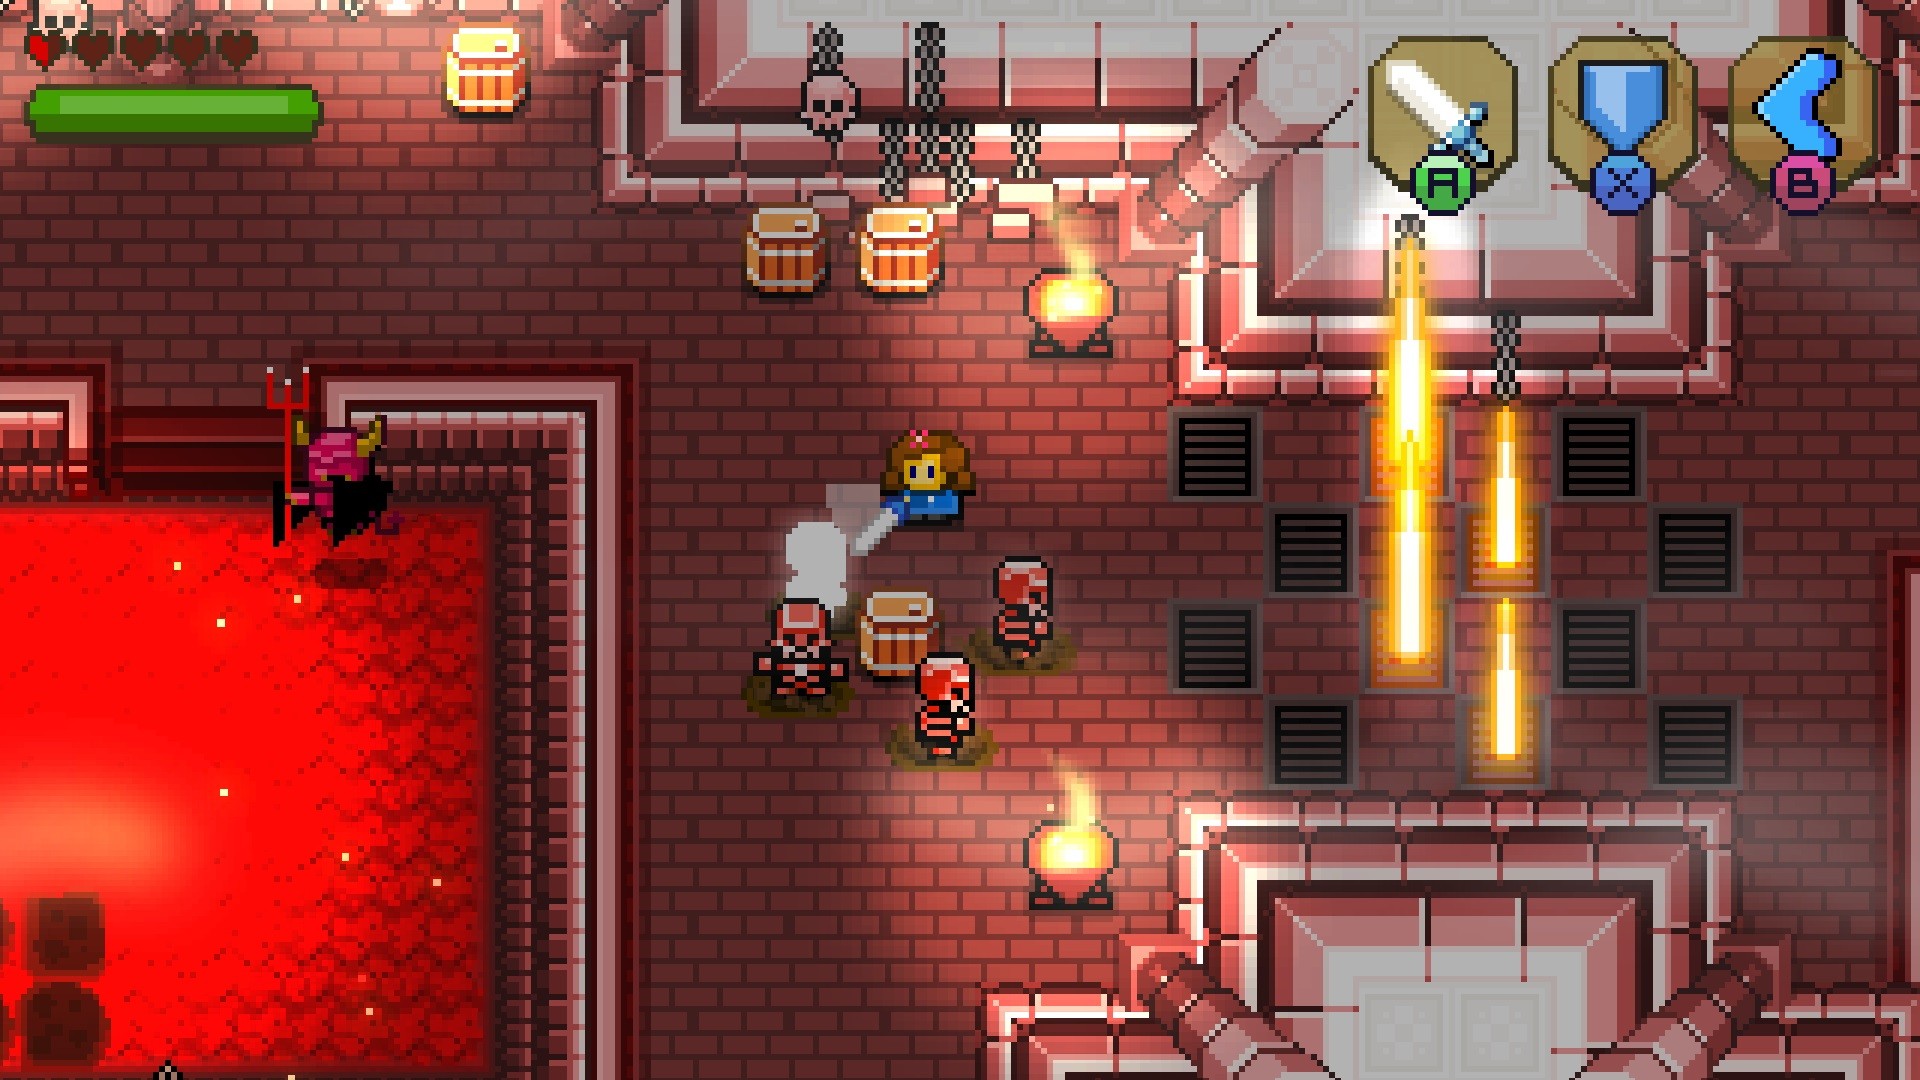 Blossom Tales 2